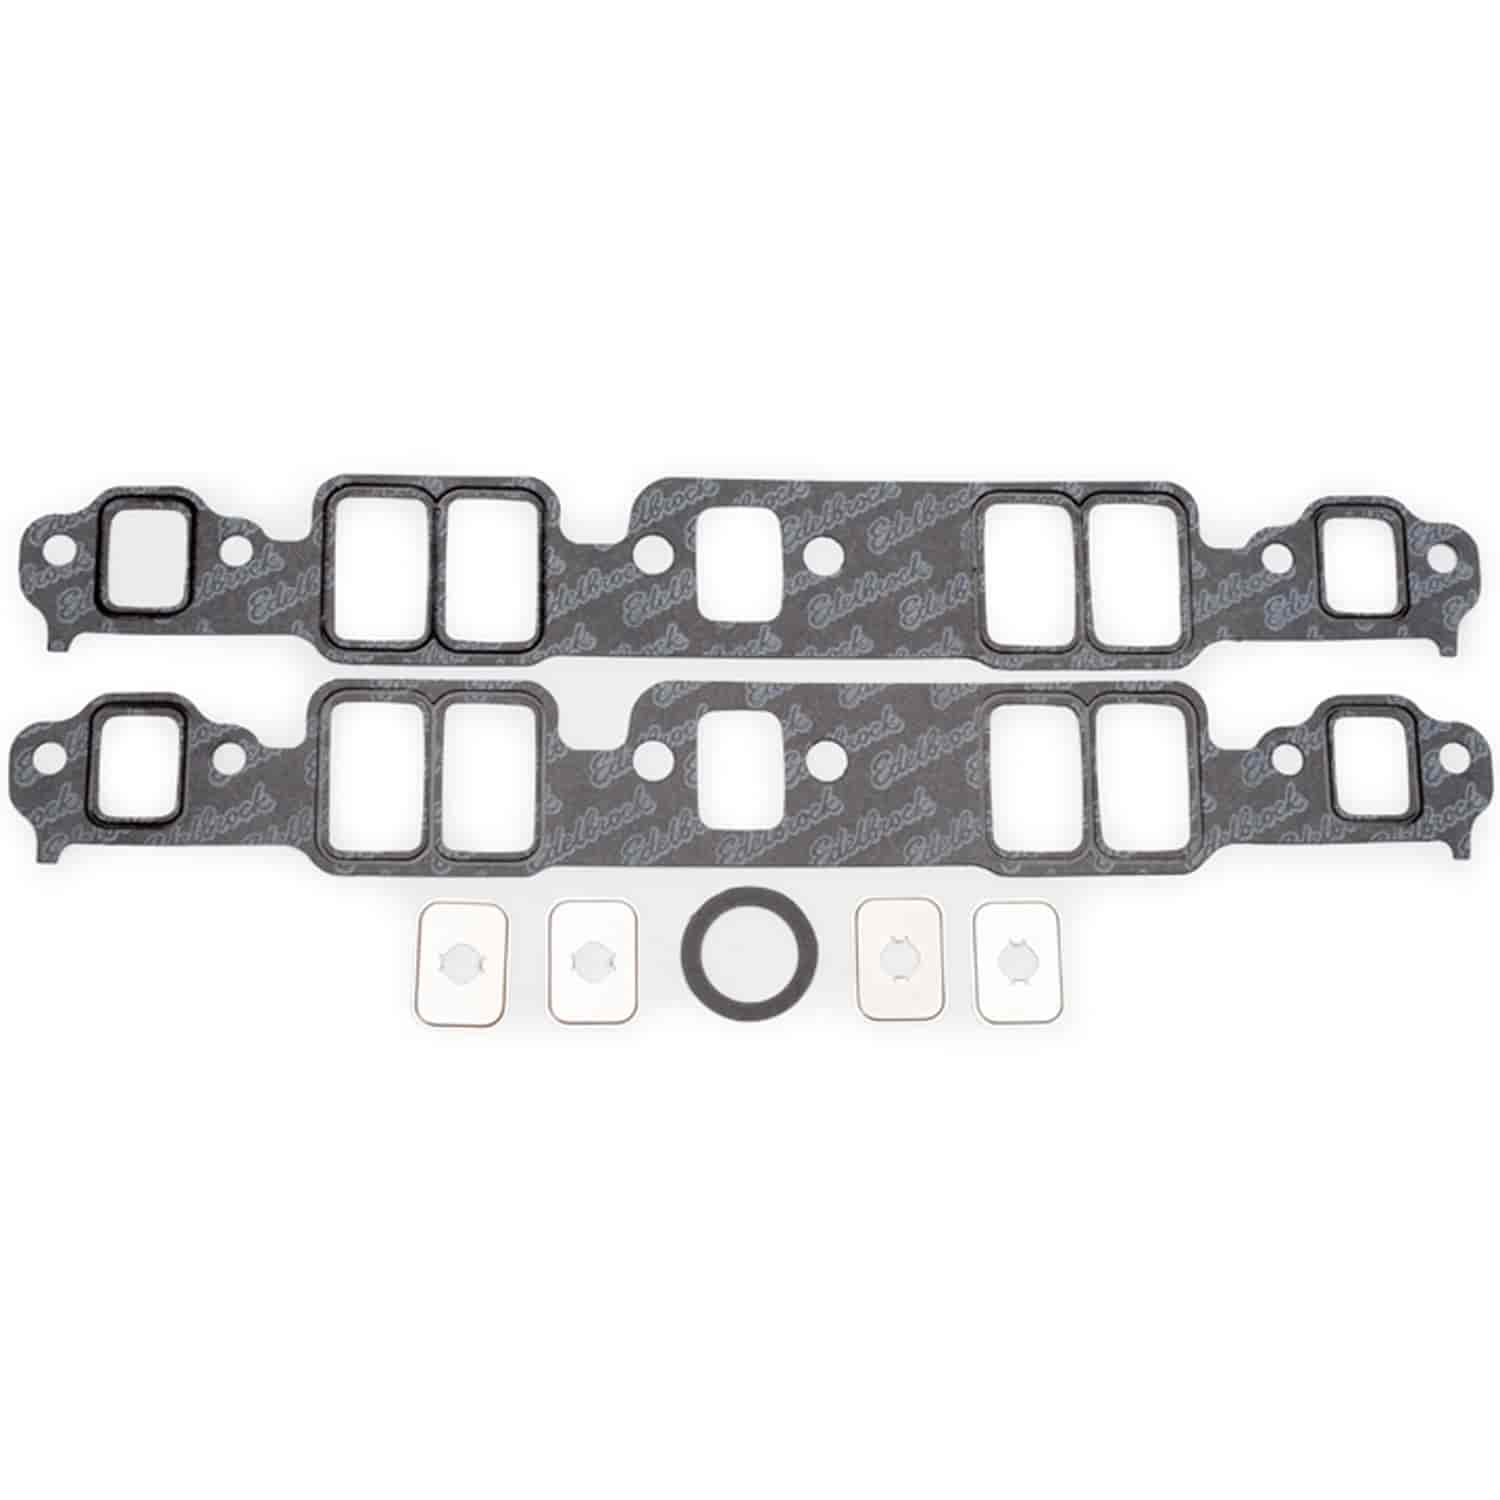 Intake Gaskets for Small Block Chevy 302-400